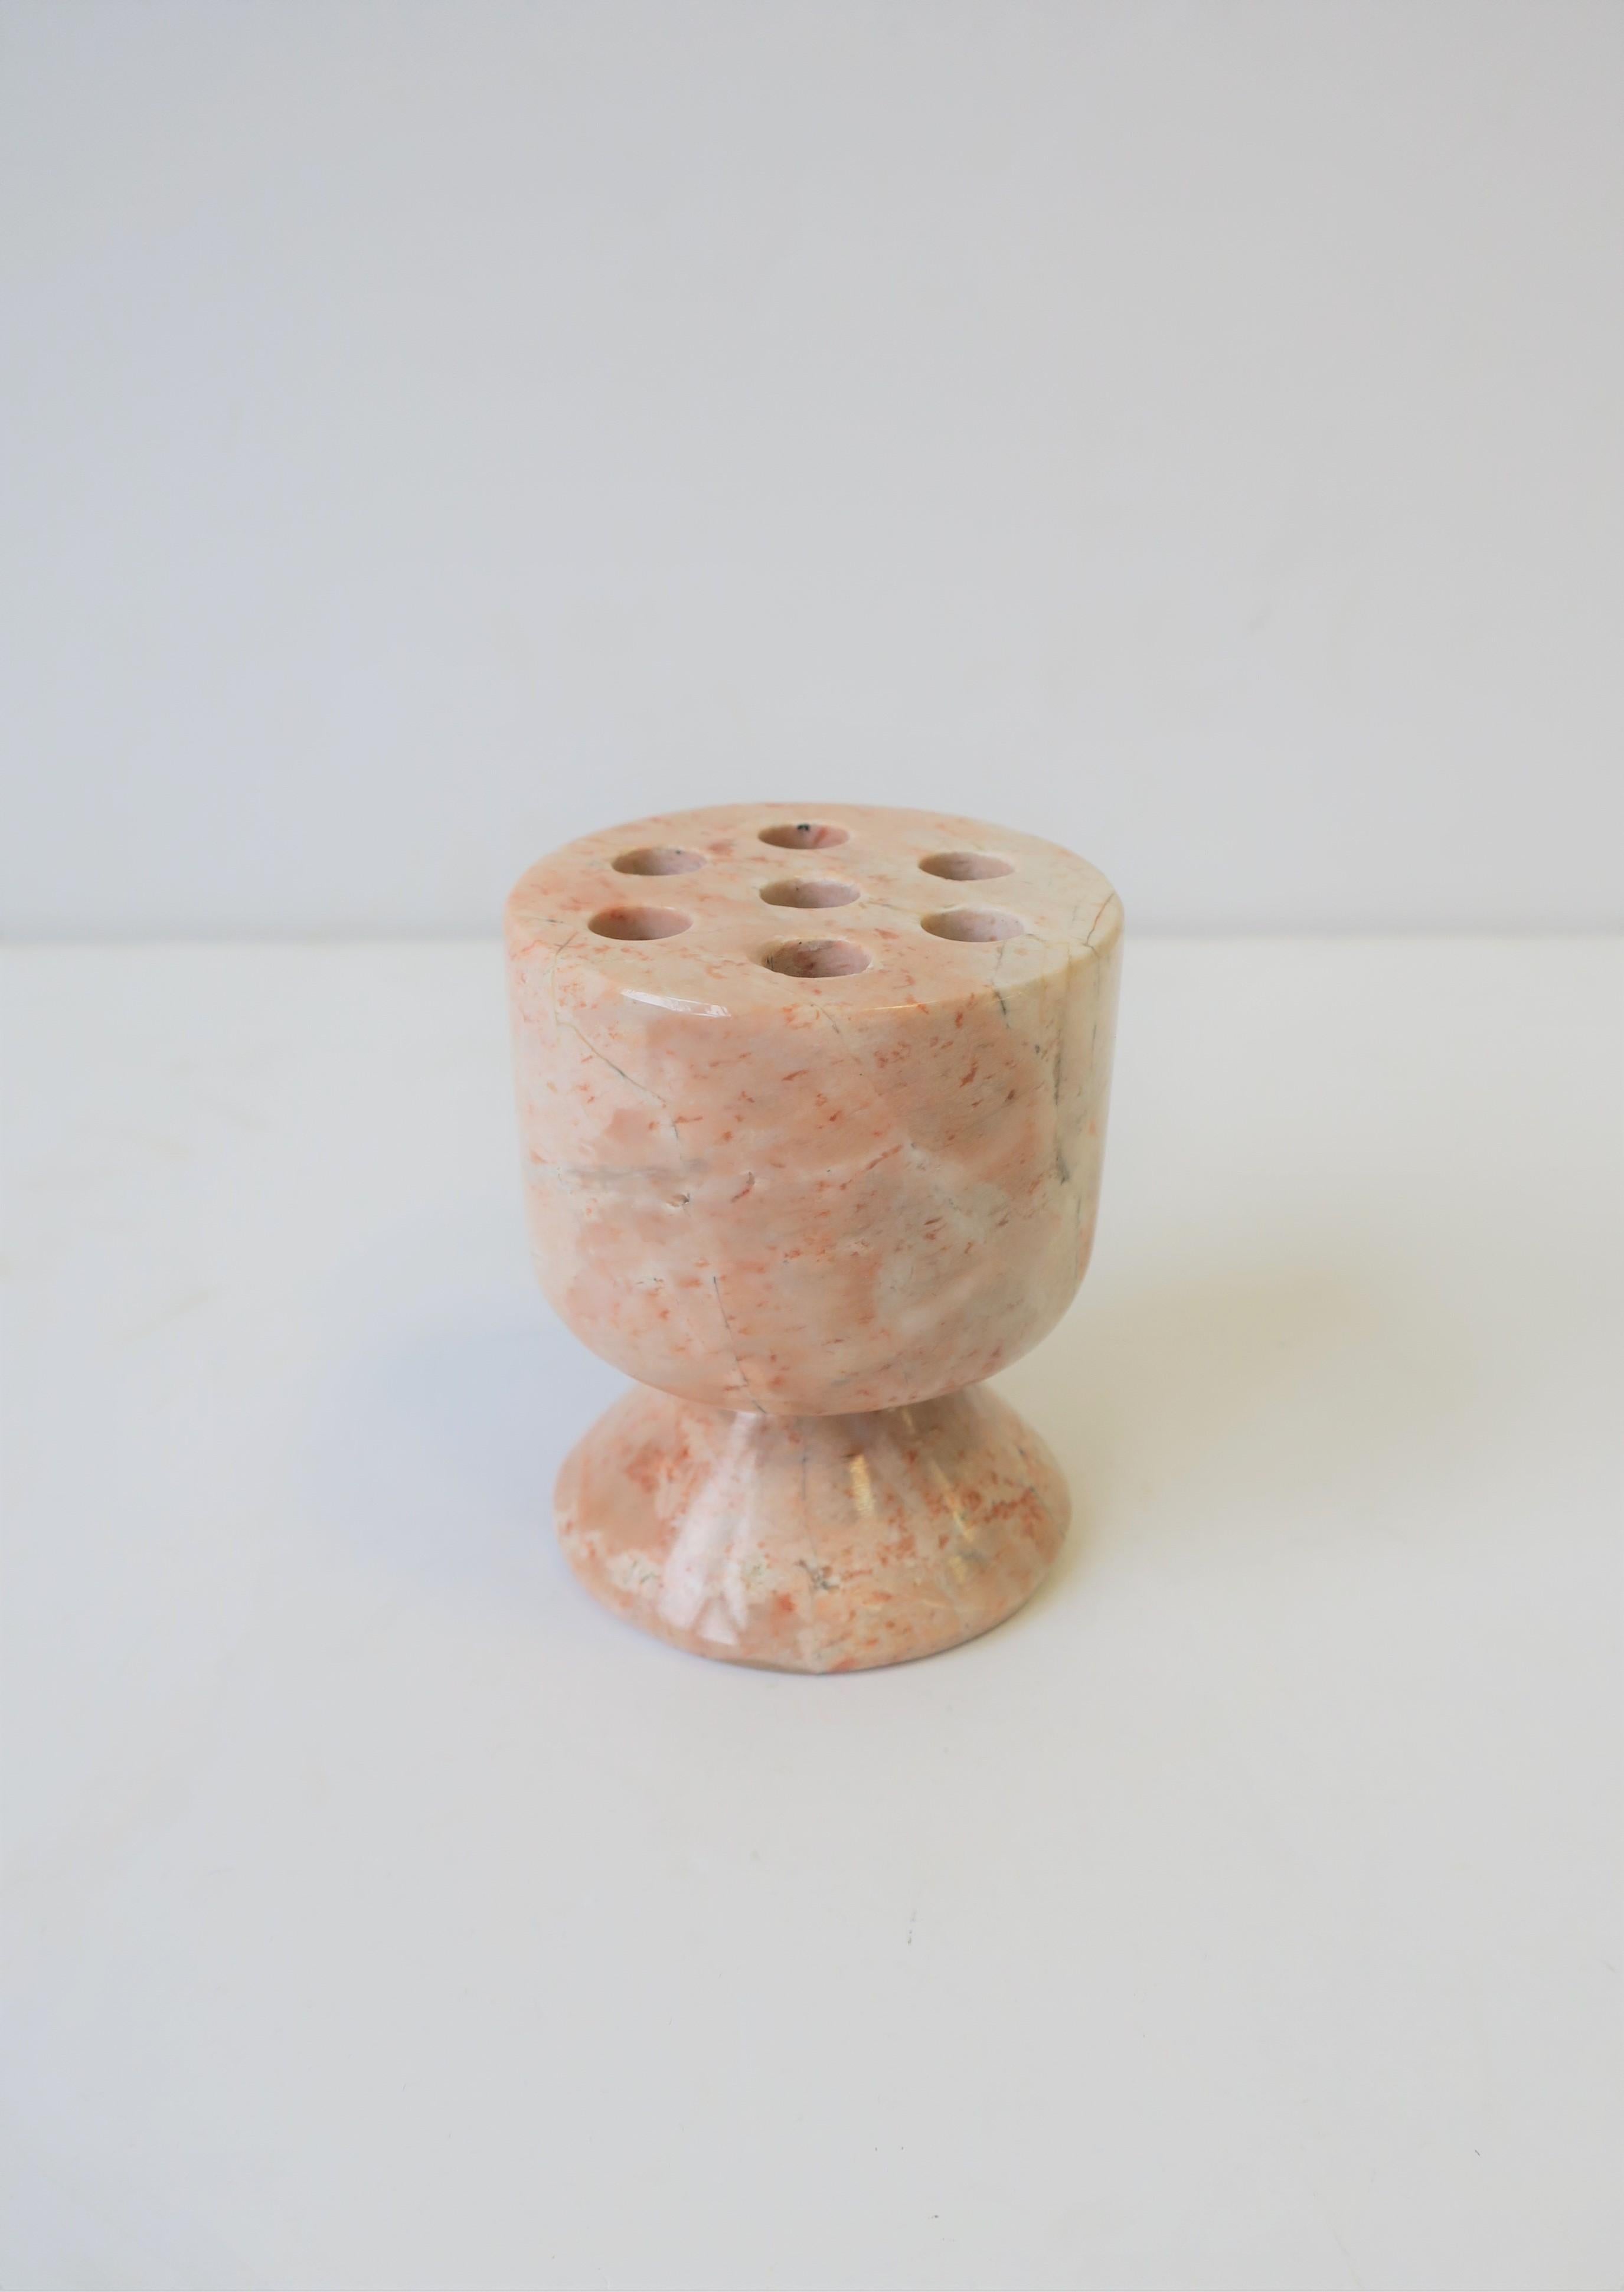 A pink marble stone modern style desk pen holder. Holder is made out of one piece of marble stone polished smooth. Piece measures: 2.5